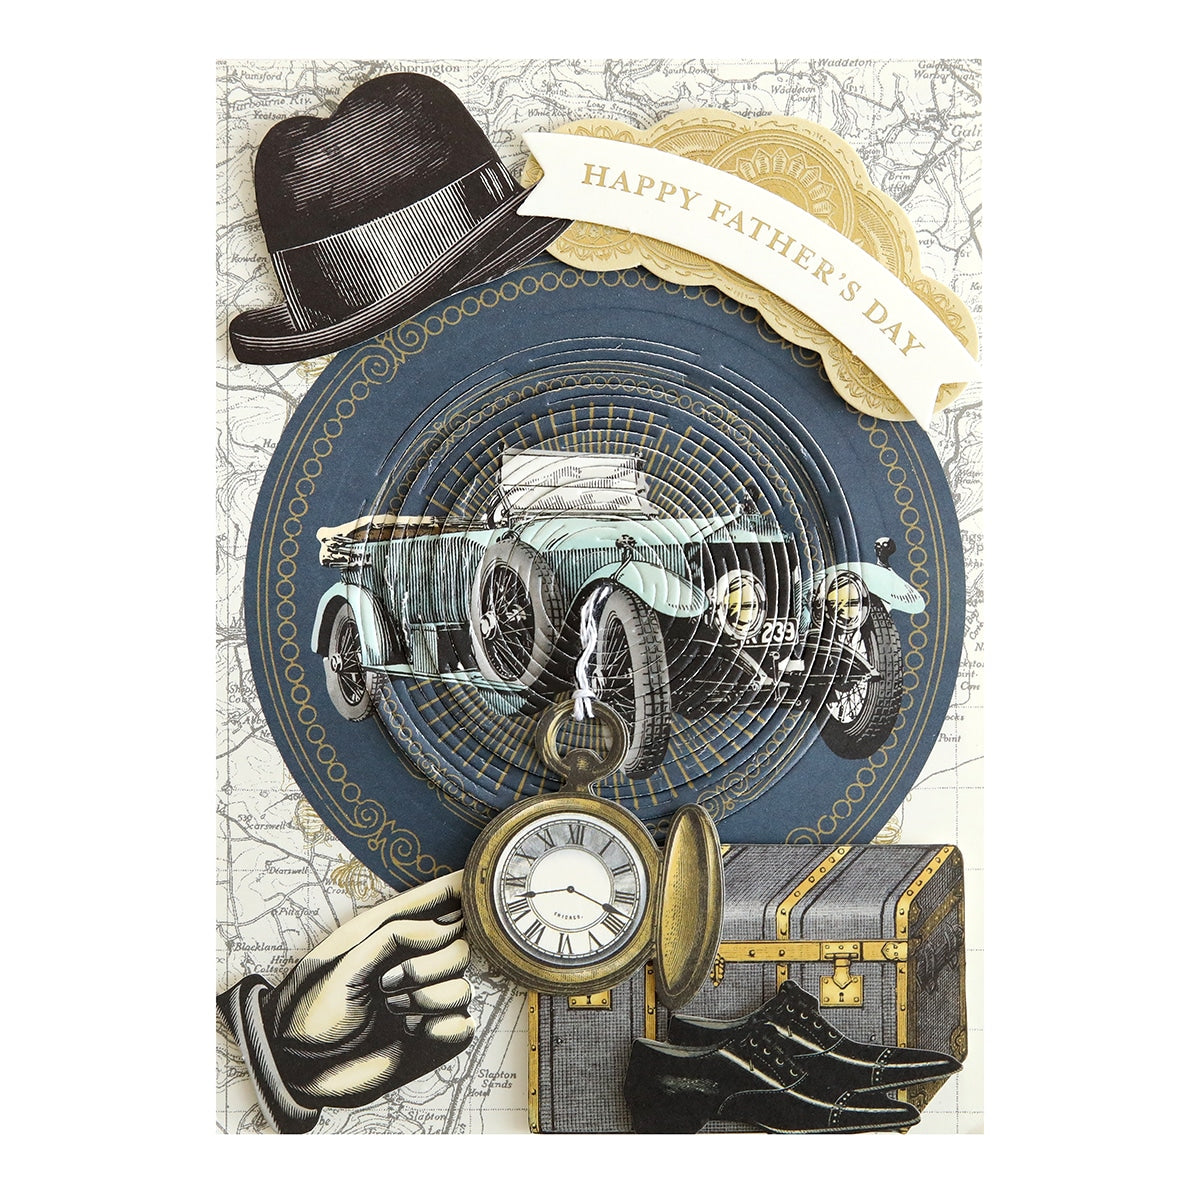 A drawing of a man with a hat and a clock from Handsome Kirigami Scenes and Embellishments.